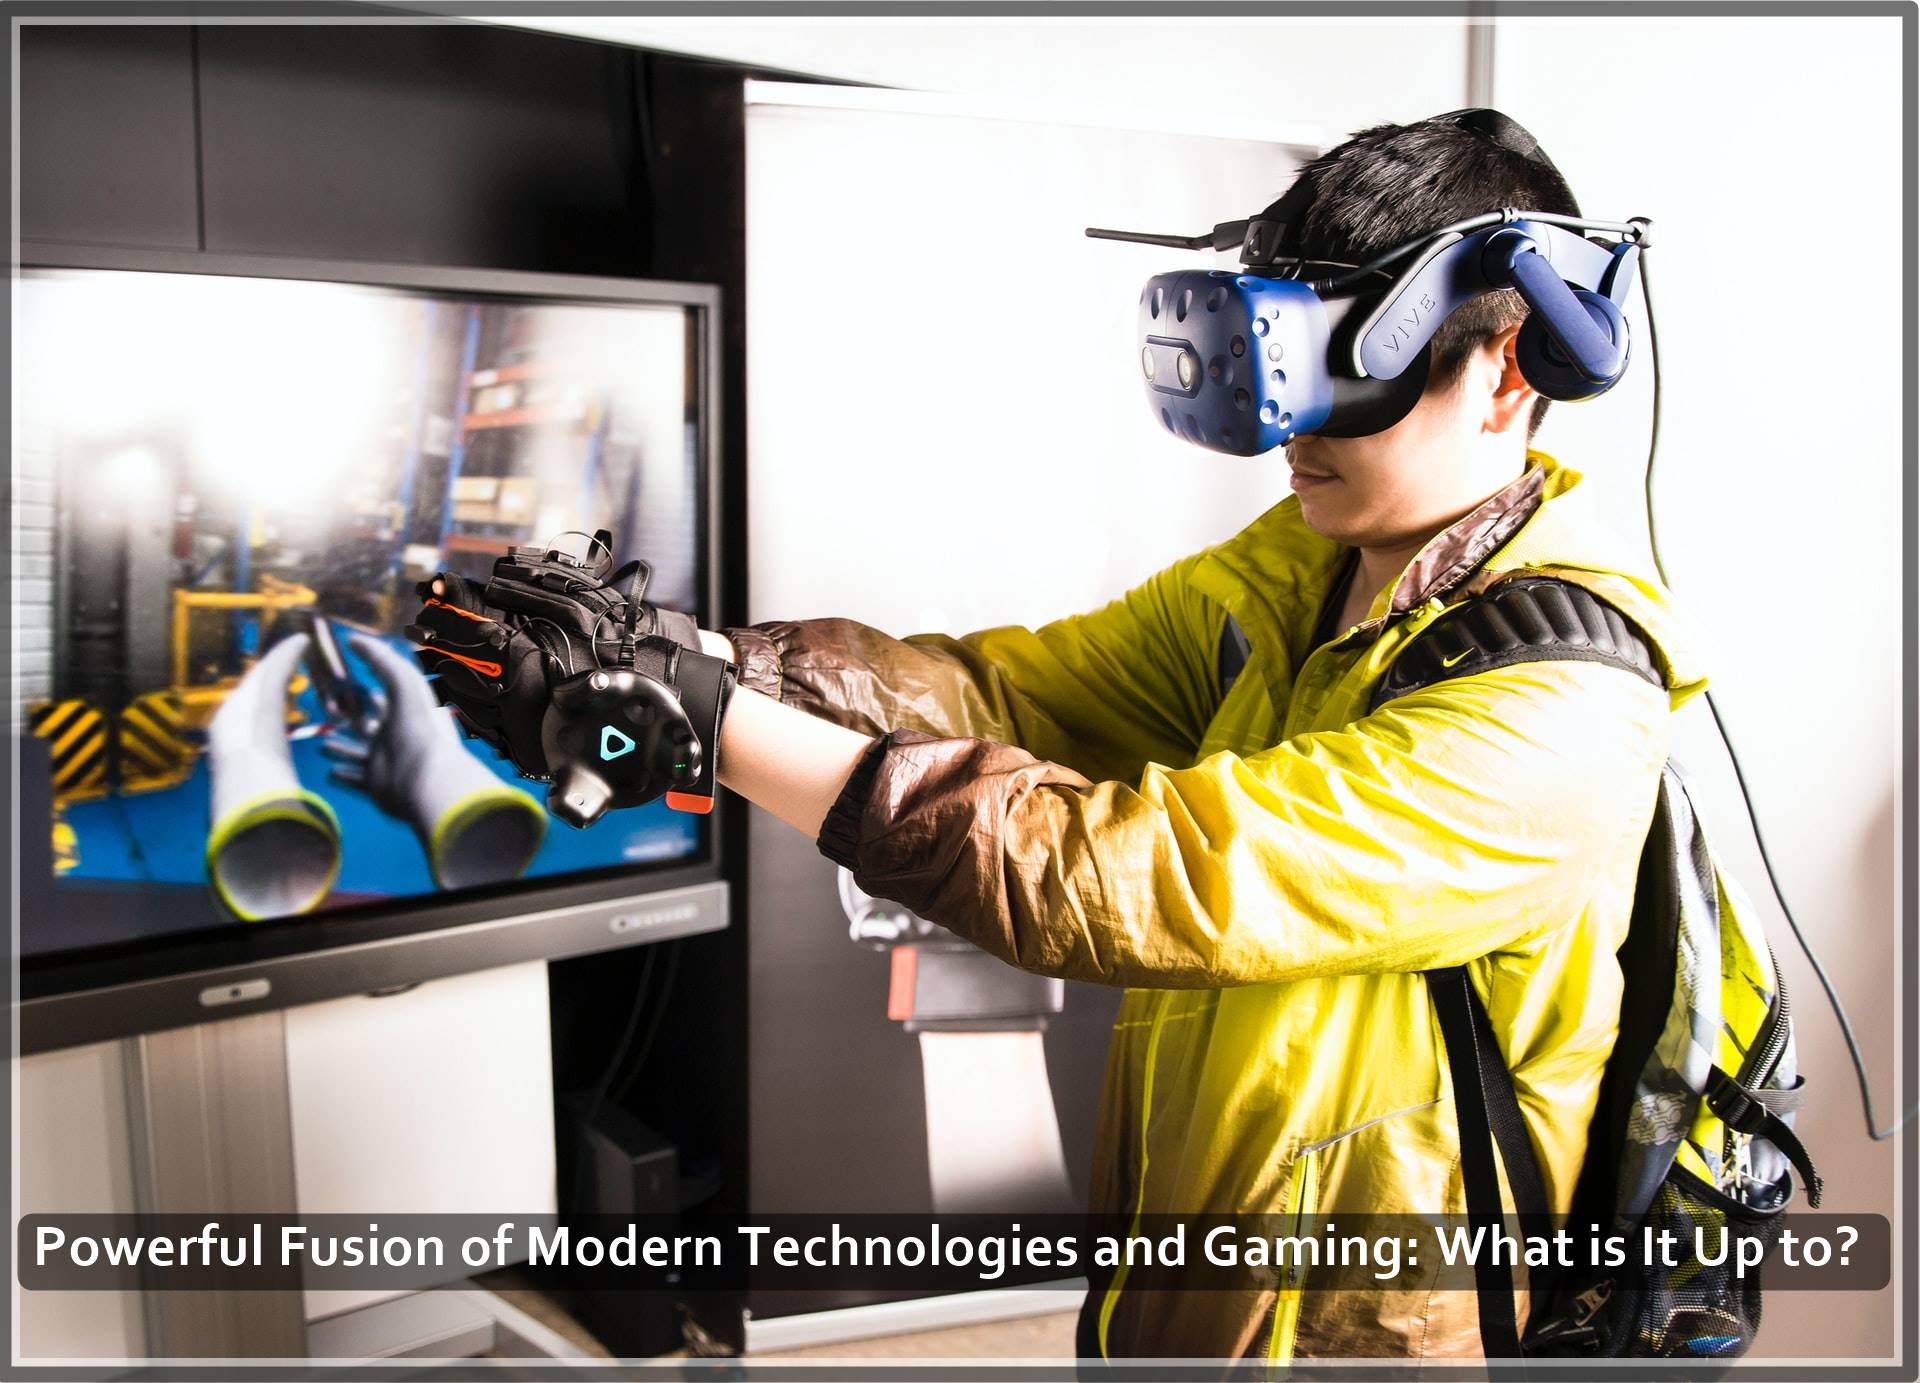 Powerful Fusion of Modern Technologies and Gaming: What is It Up to?